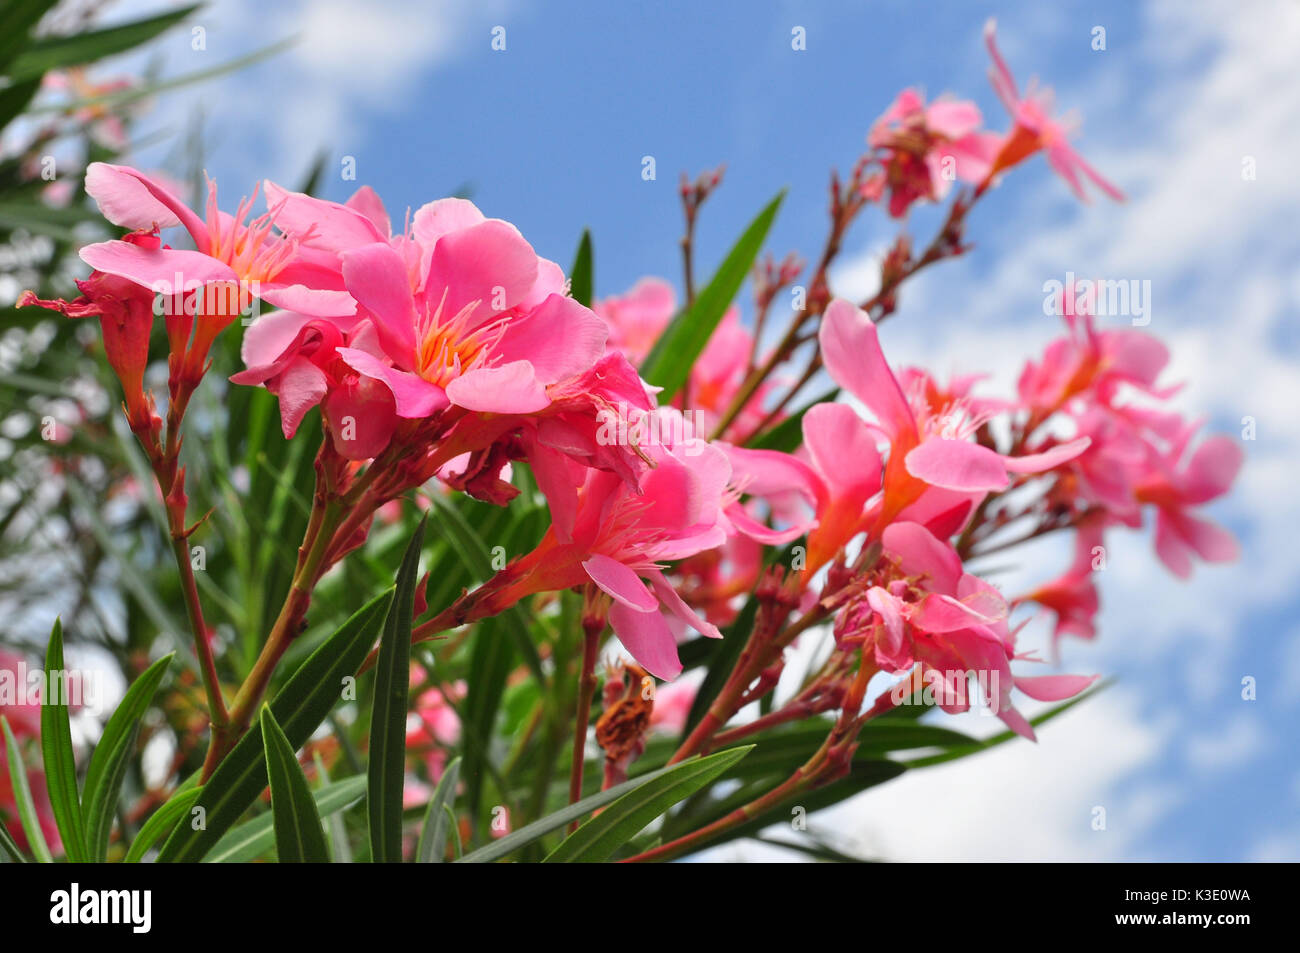 Oleander, blossoms, pink ones, Stock Photo